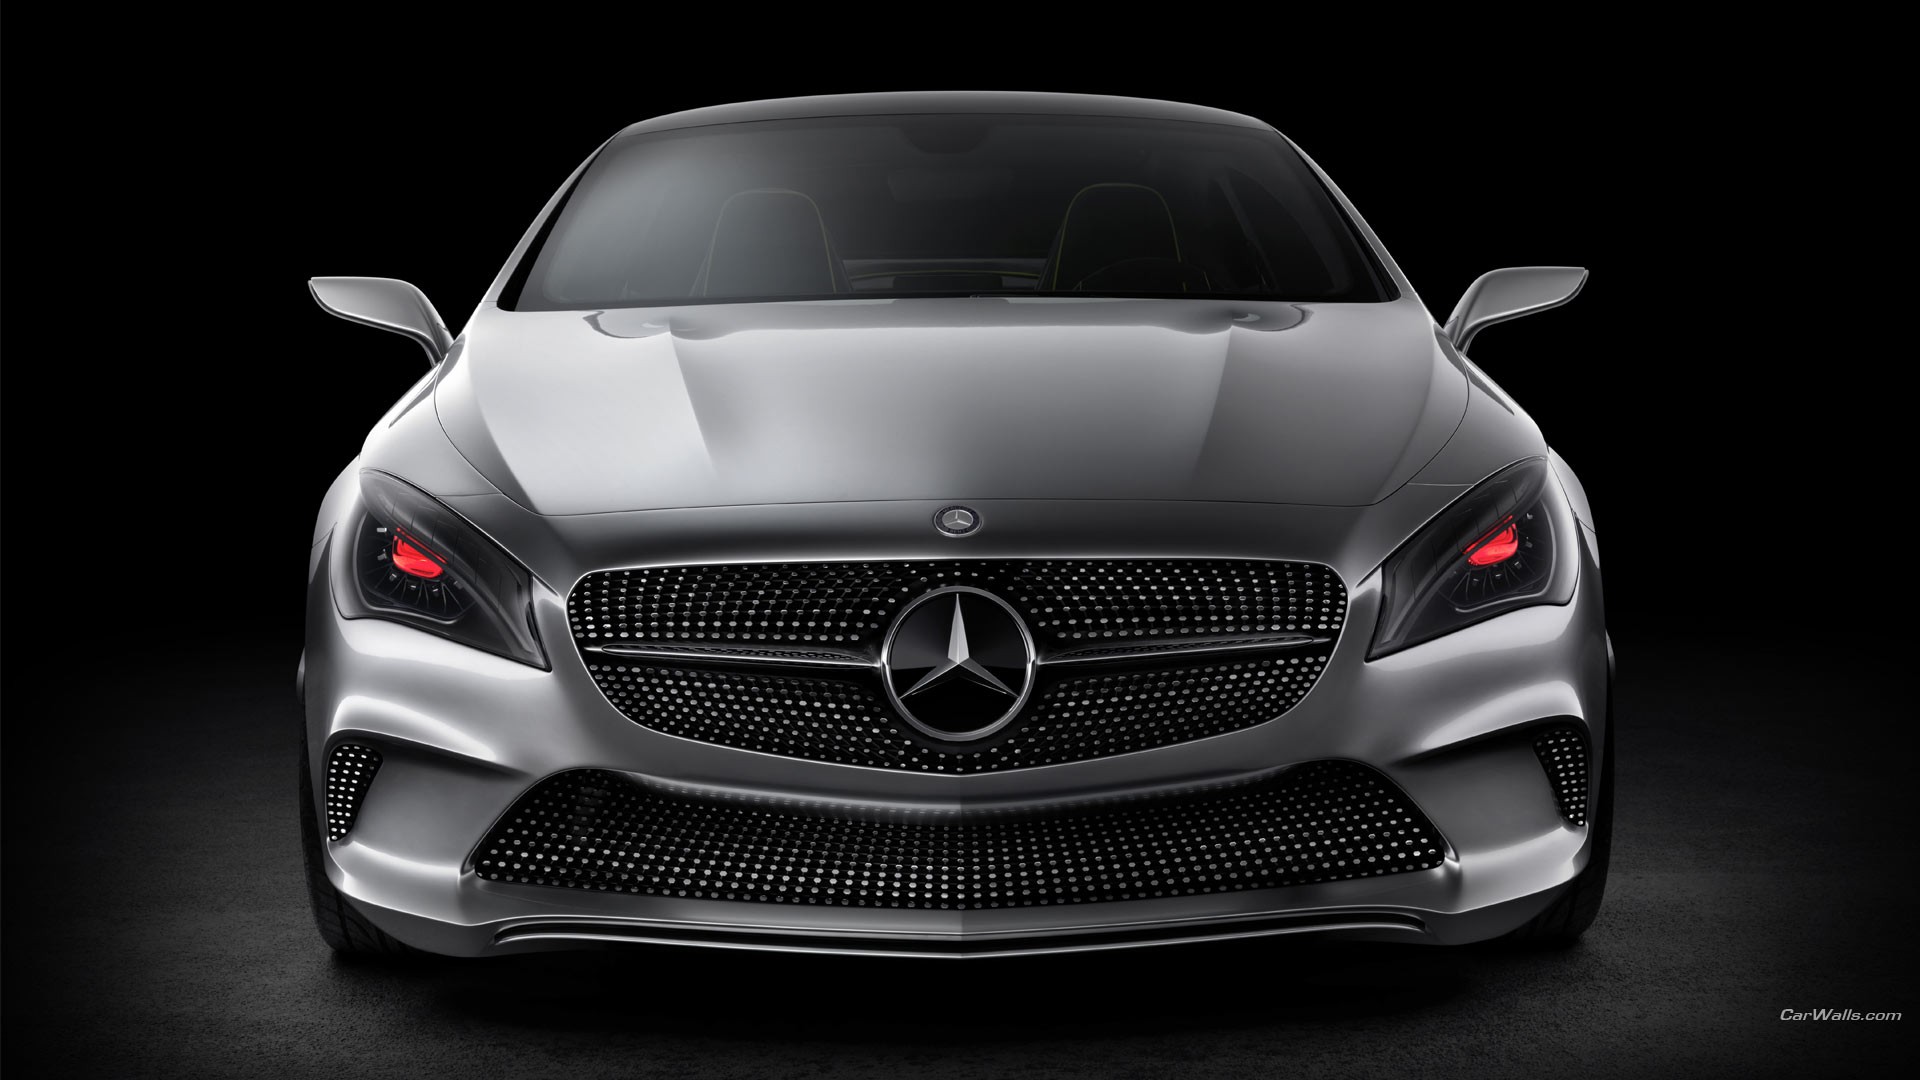 Mercedes Style Coupe, Concept Cars, Car Wallpaper